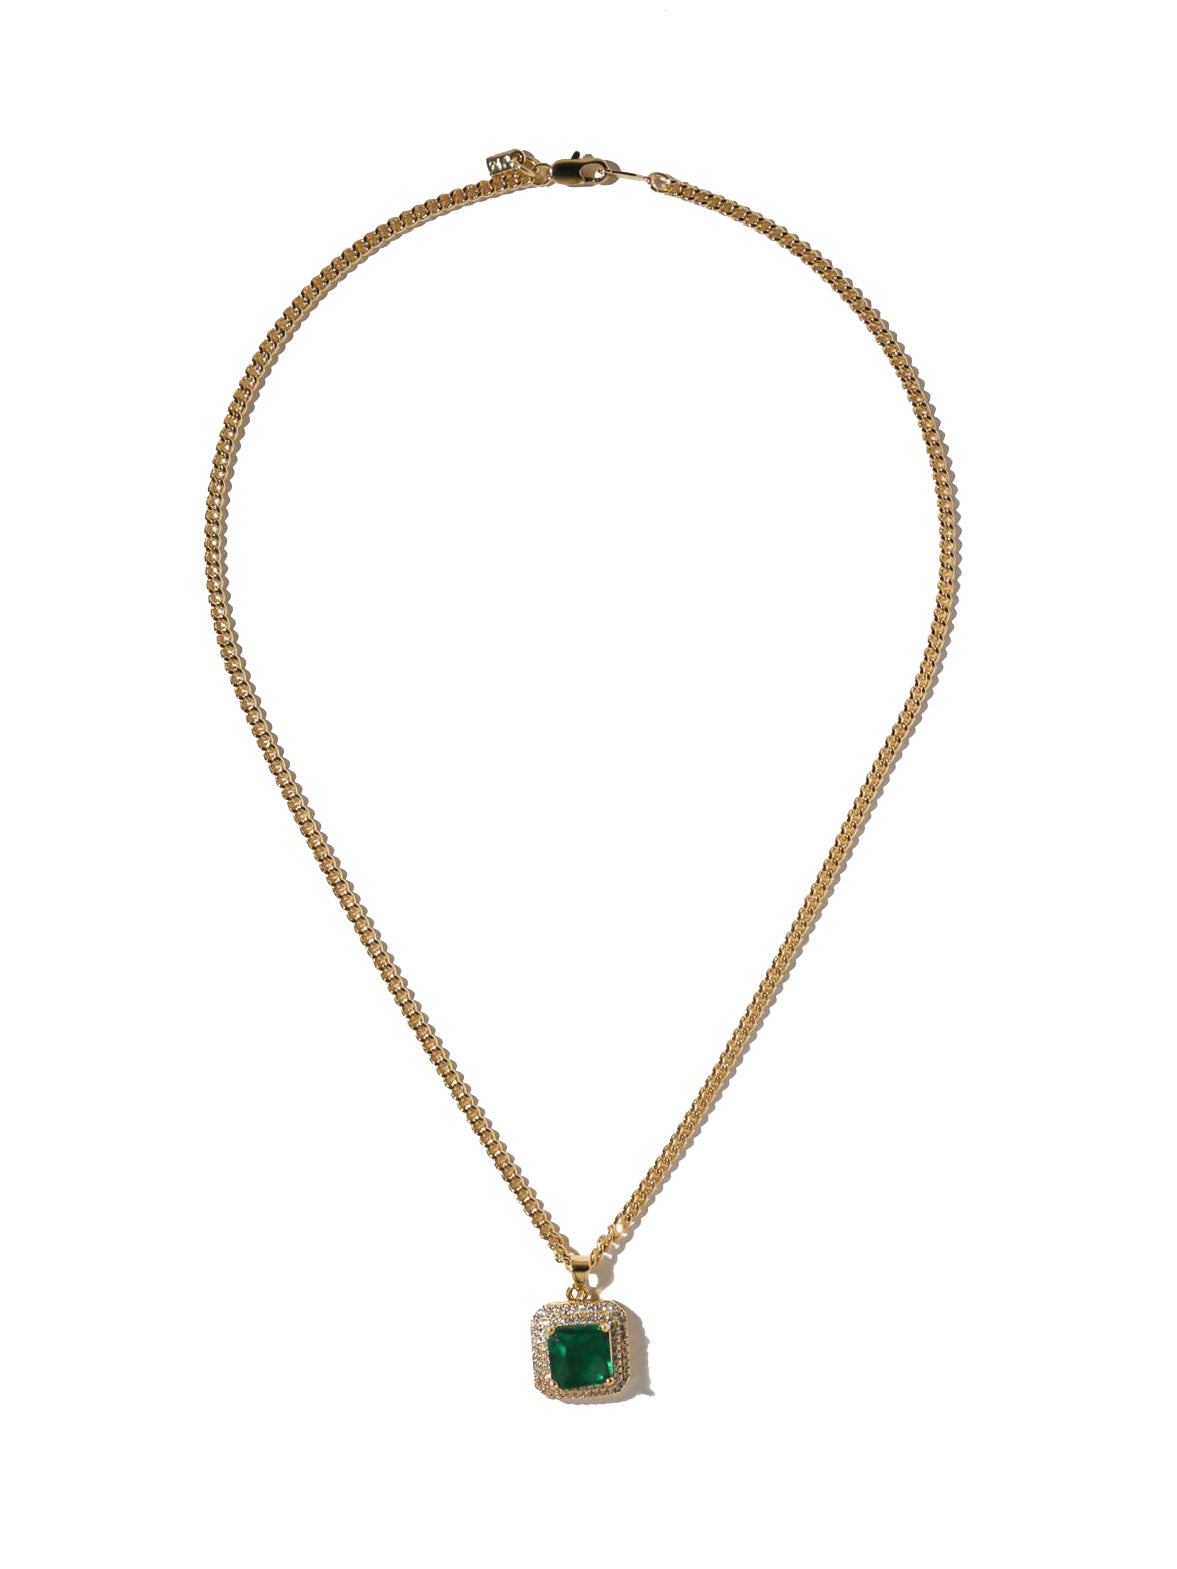 The Emerald Isle Necklace